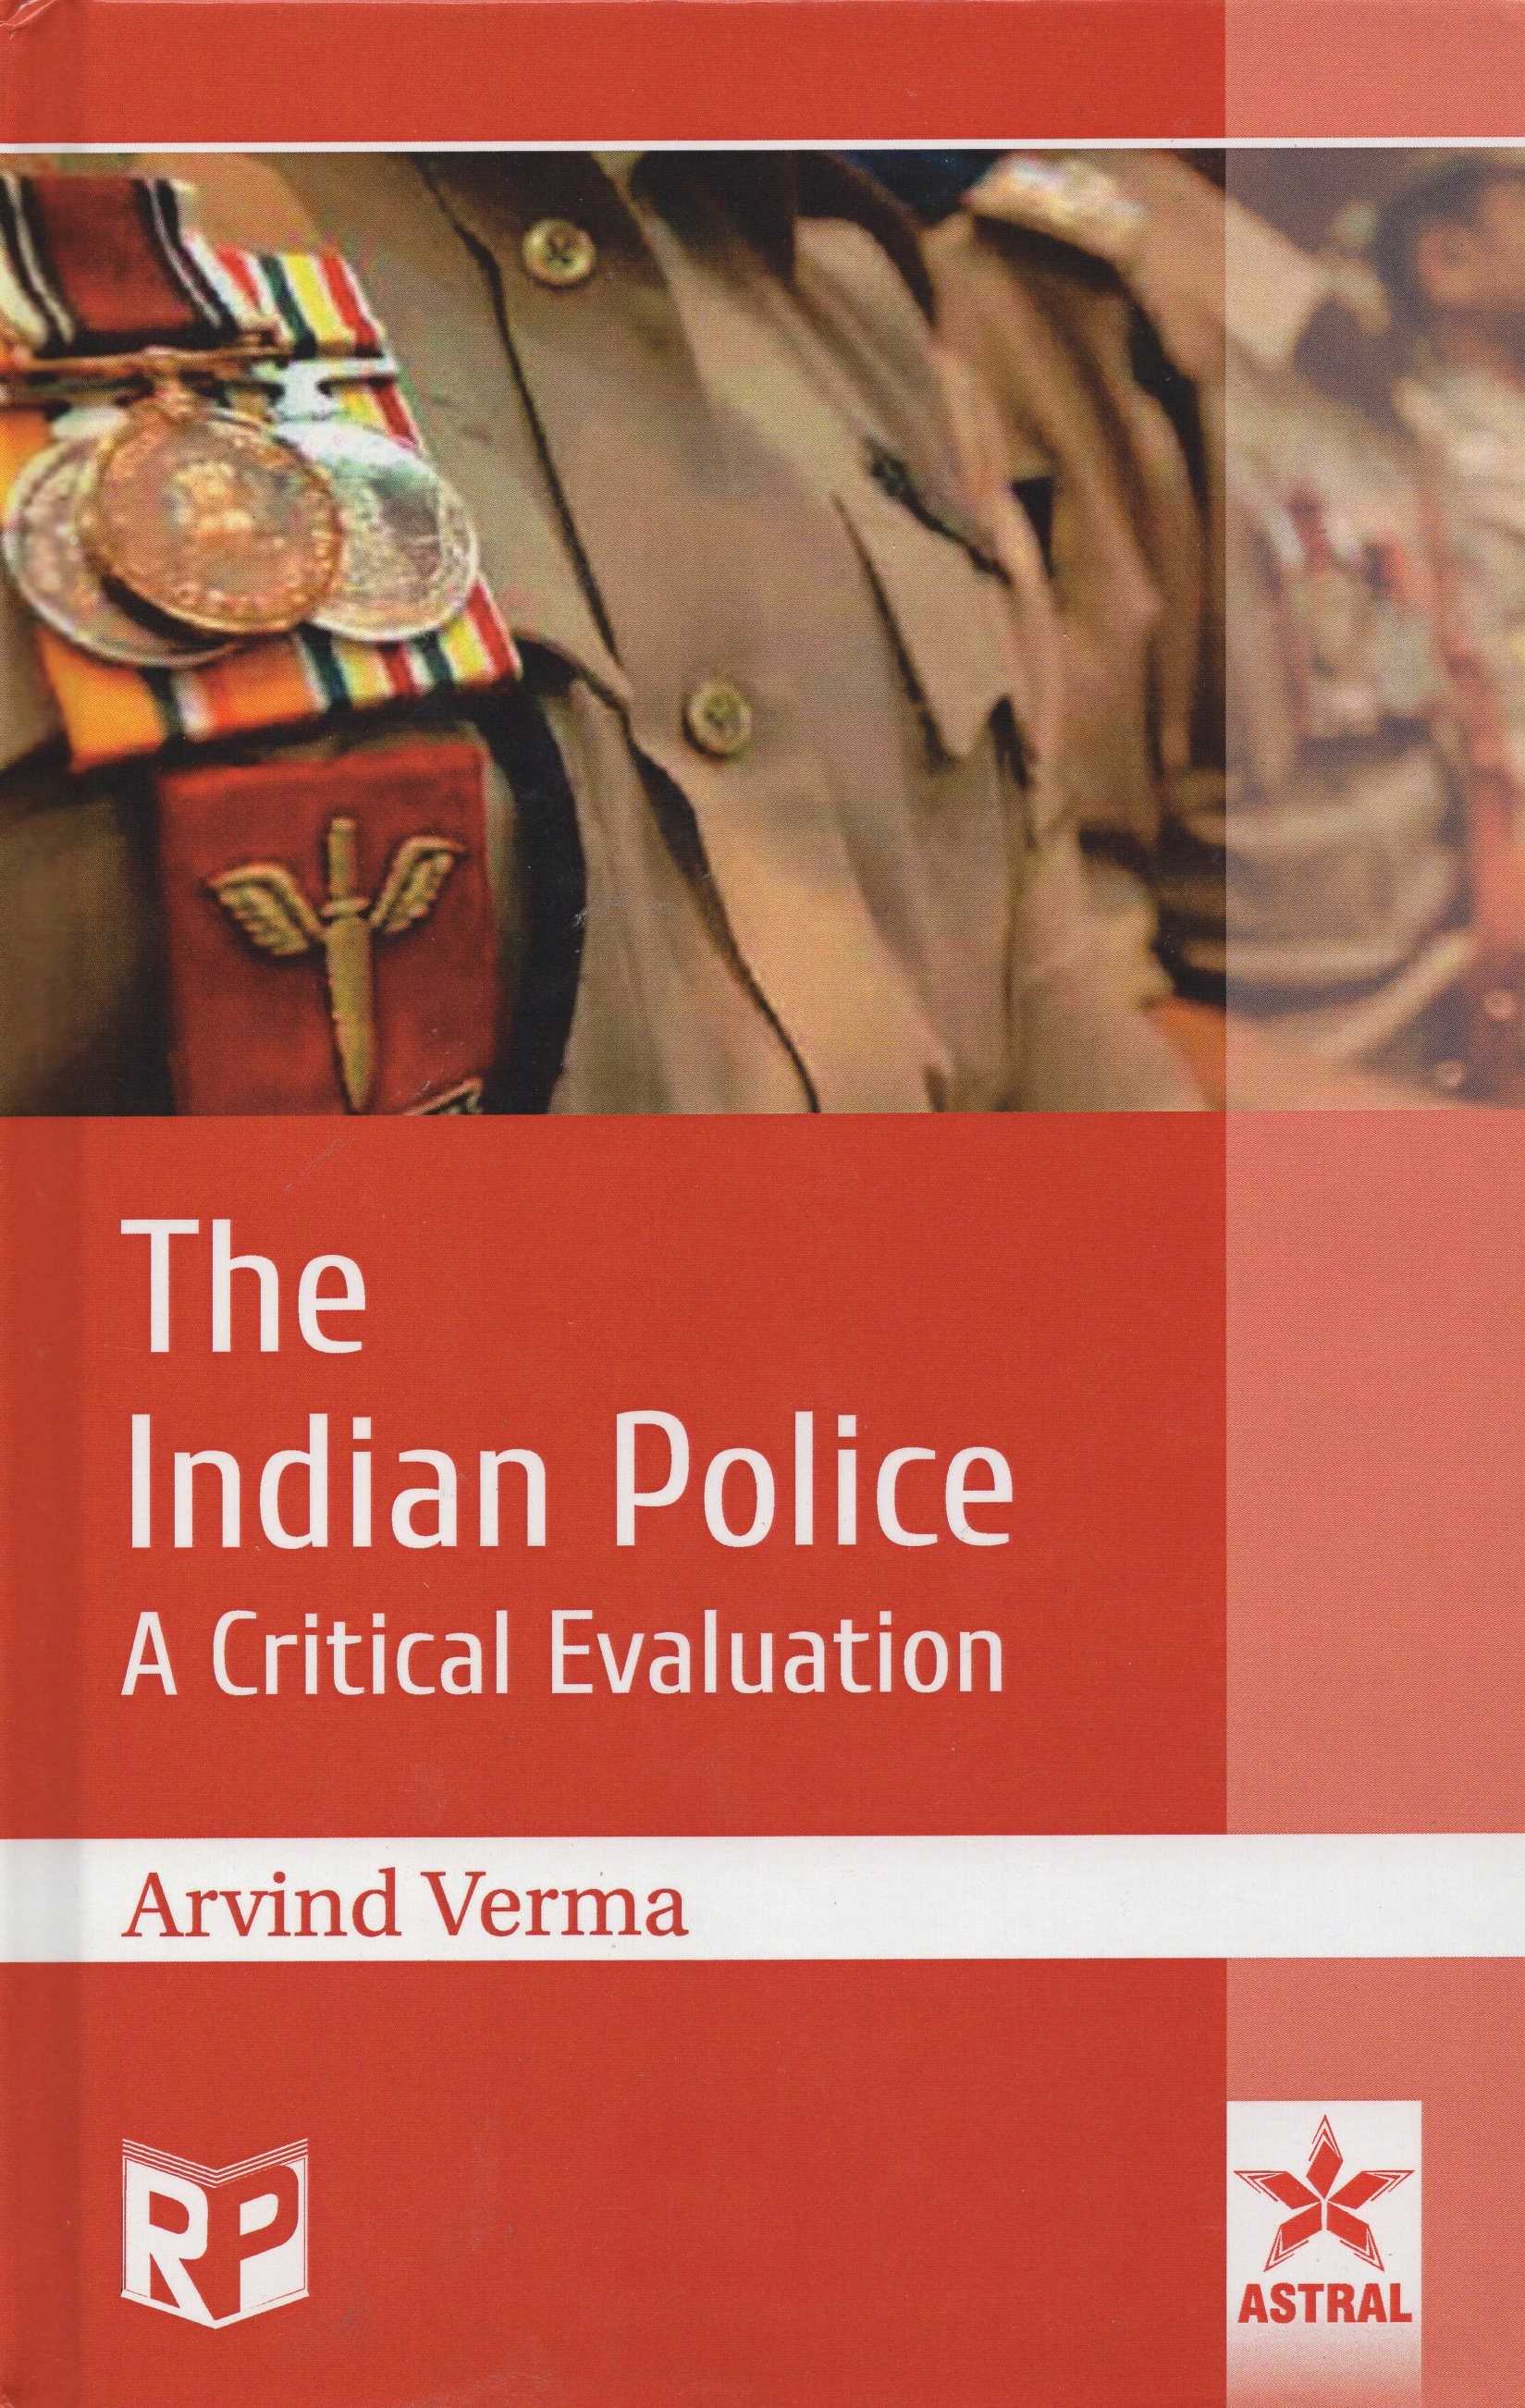 THE INDIAN POLICE: A CRITICAL EVALUATION